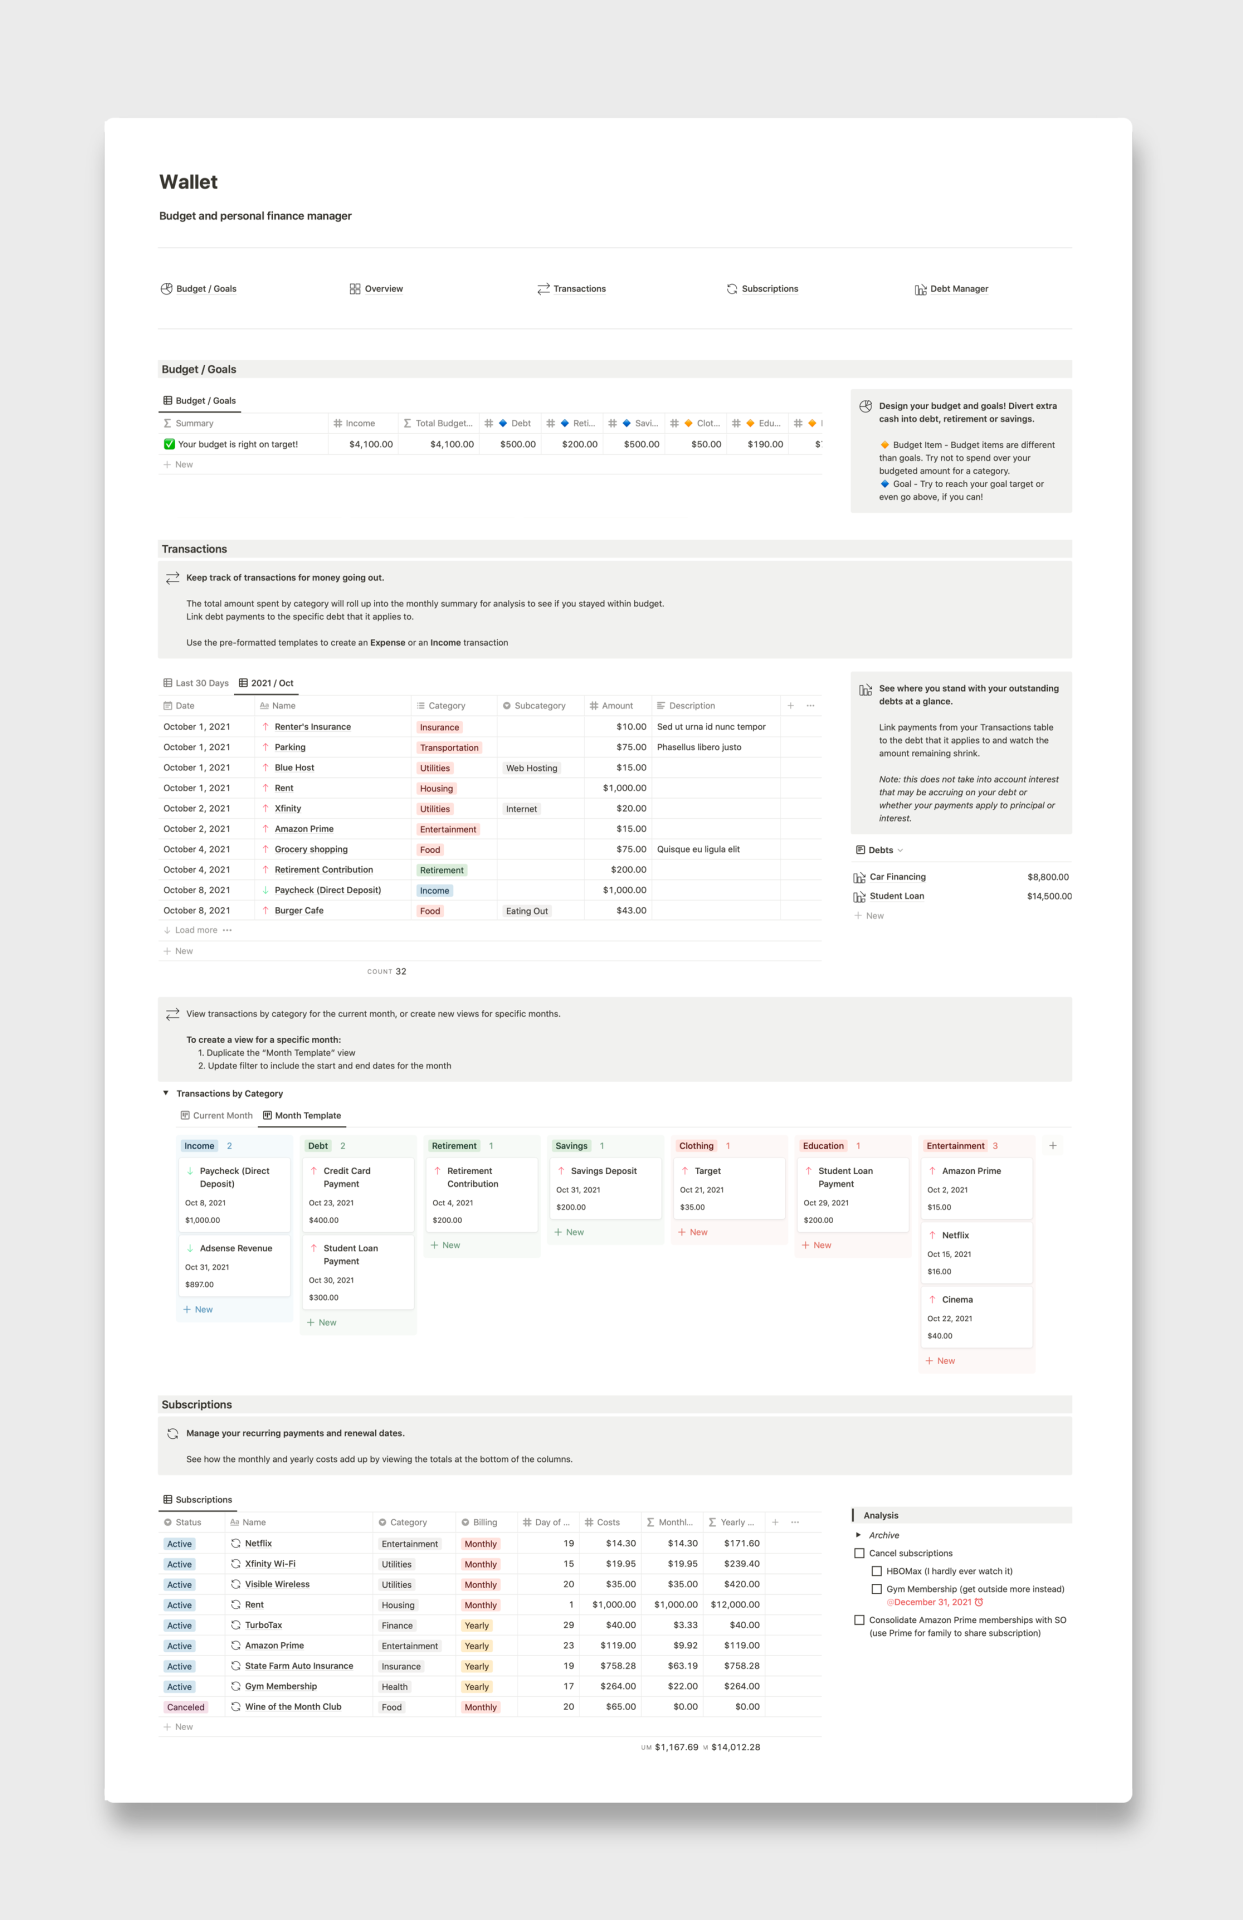 "Wallet" Notion budget and personal finance manager dashboard